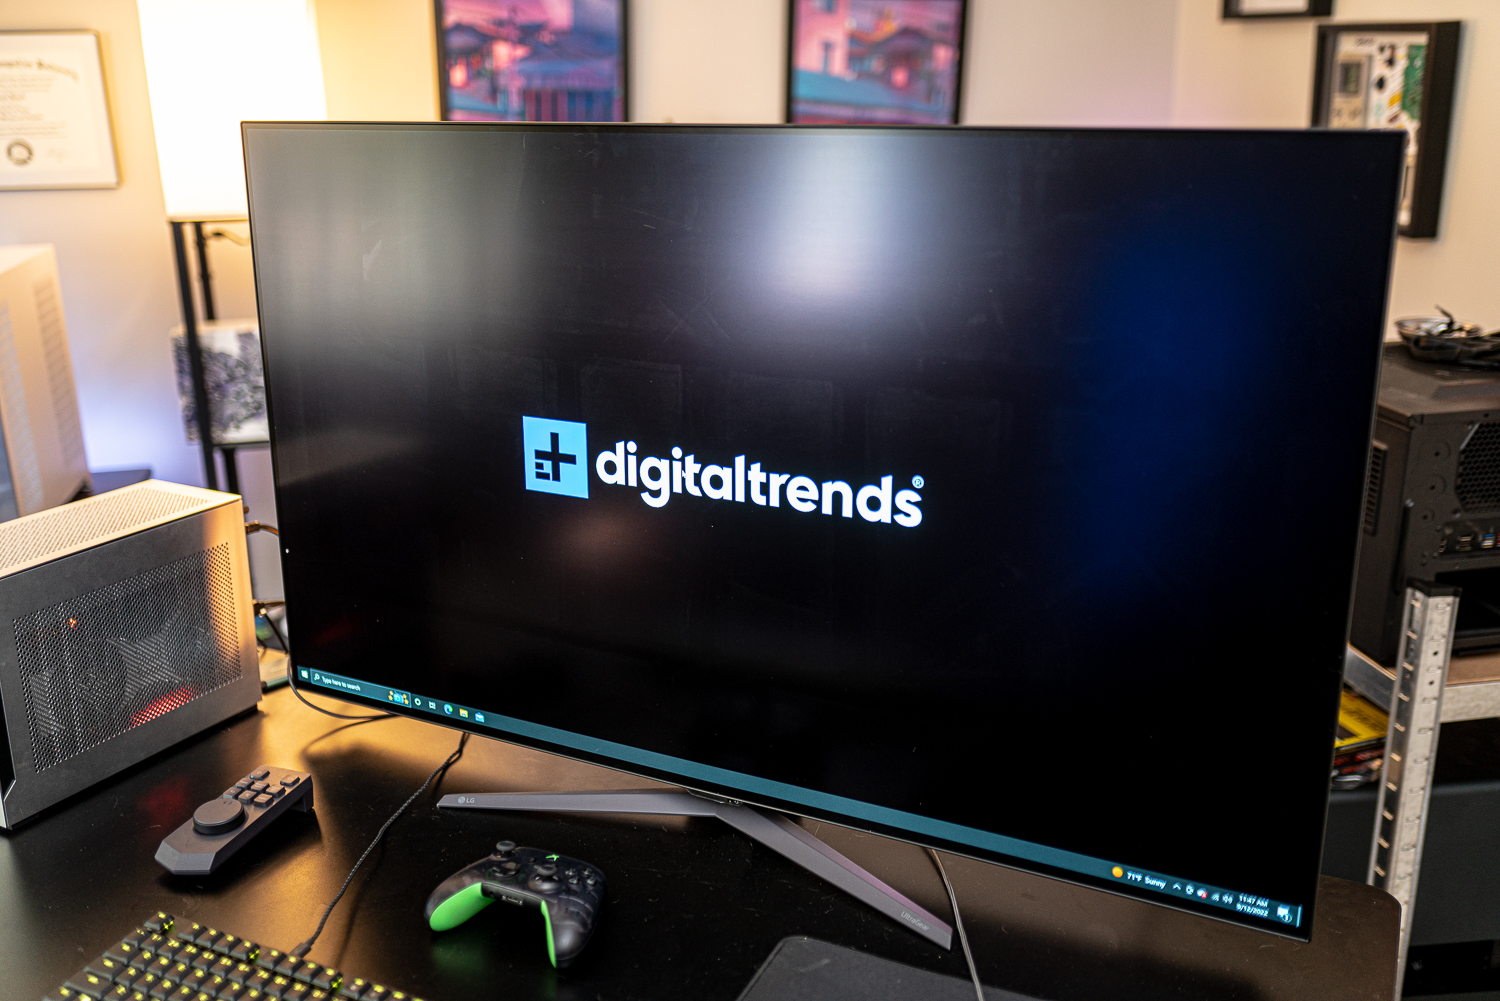 The Digital Trends logo on the UltraGear 48-inch OLED monitor.